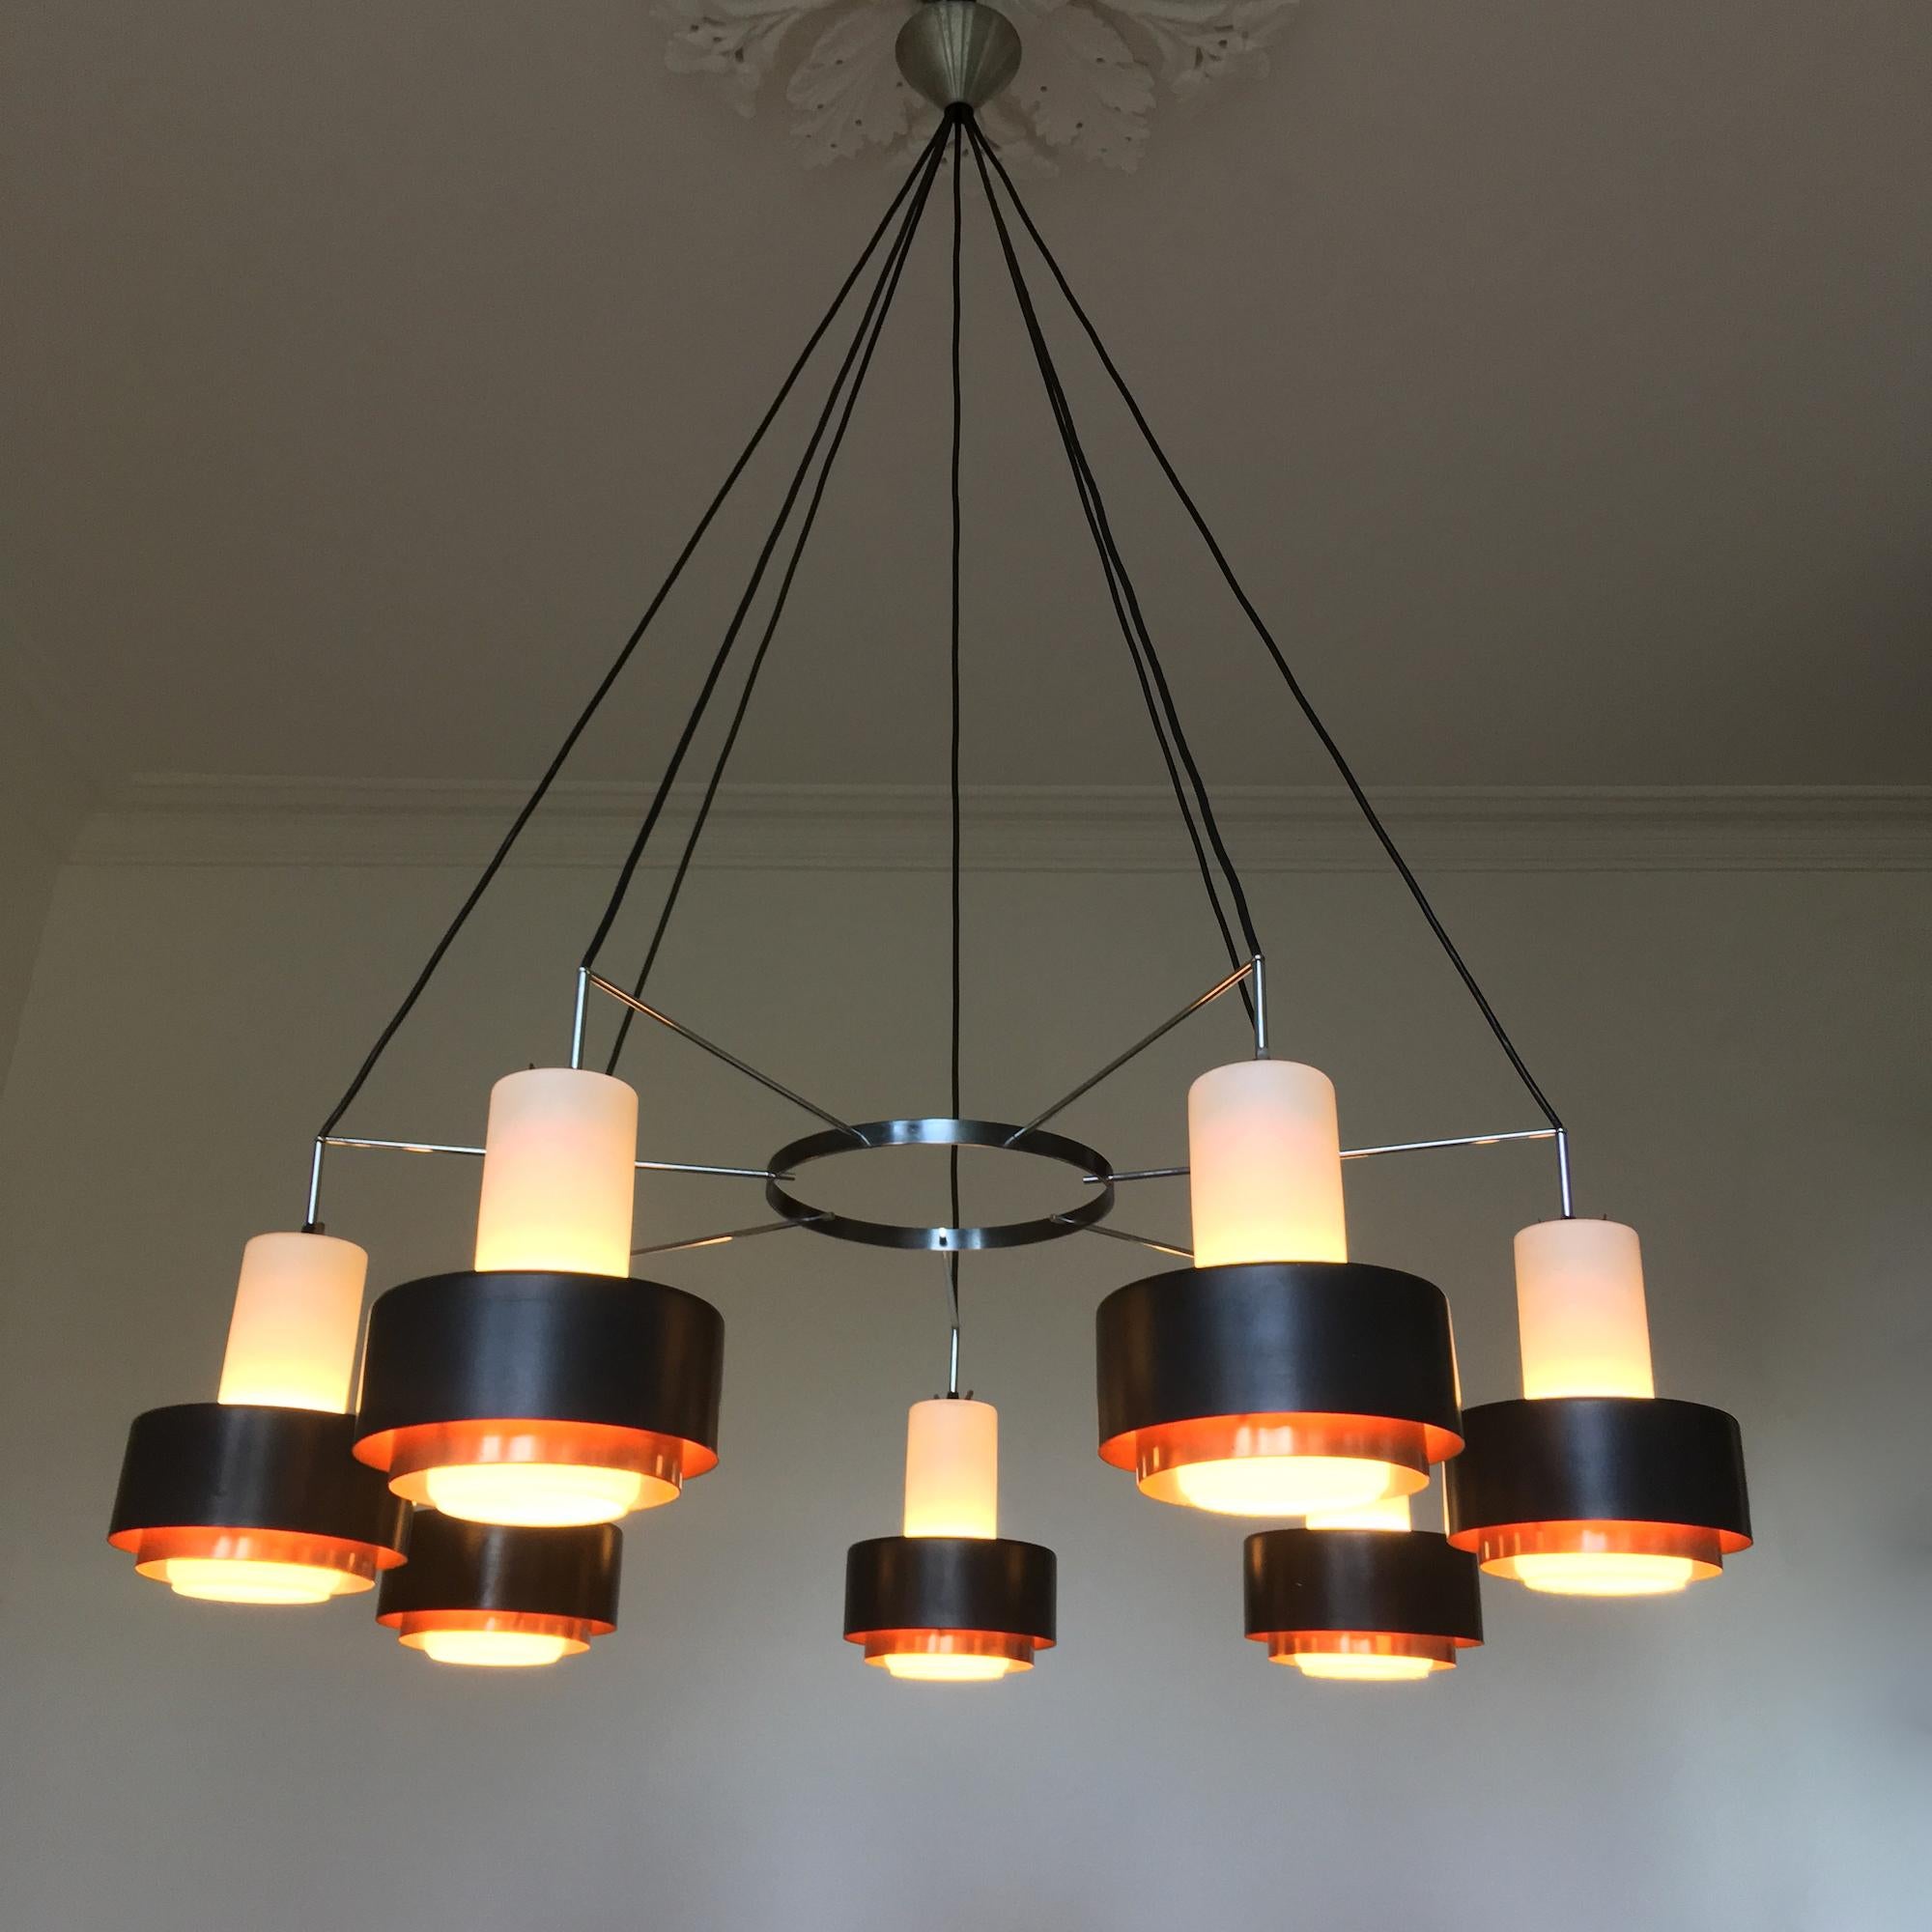 Large Mid-Century Modern Chandelier with White Glass, Black and Copper Shades 1